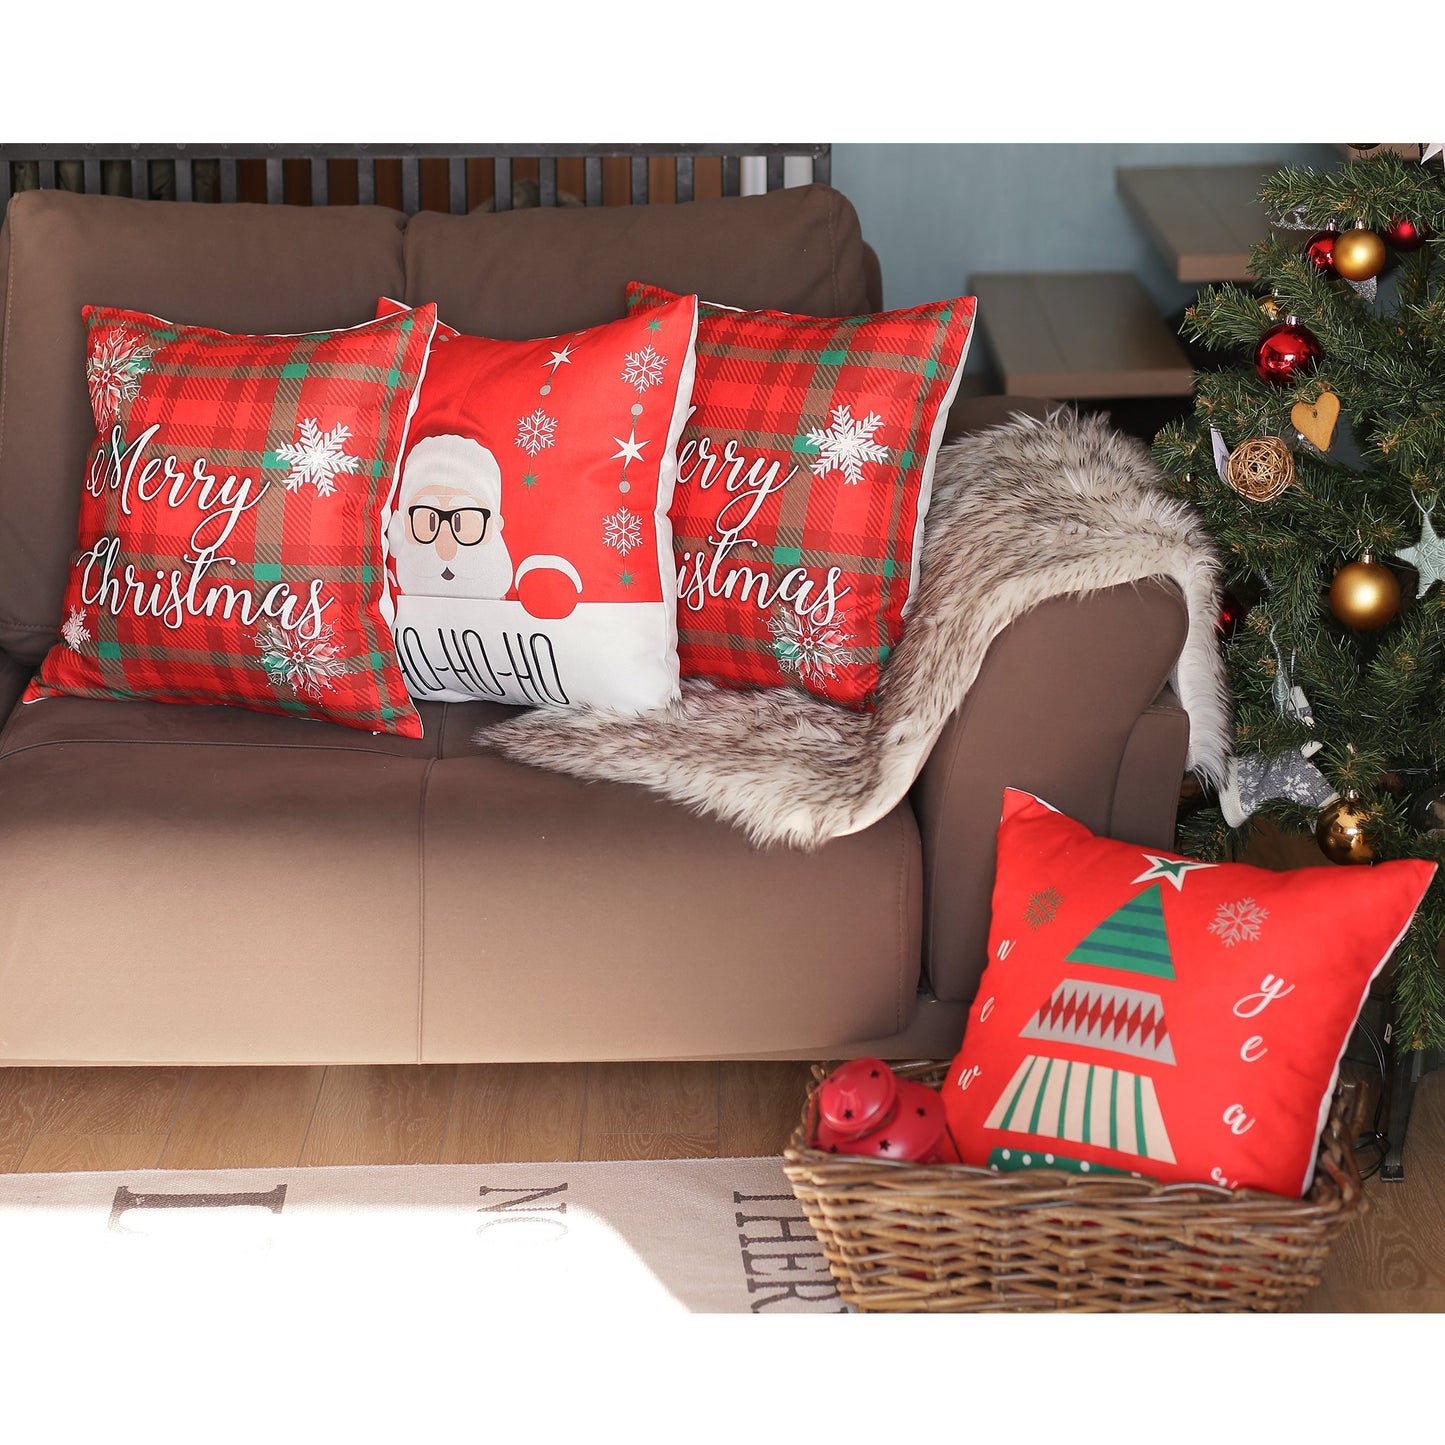 Decorative Christmas Themed Throw Pillow Cover Set of 4 Square 18" x 18" White & Red for Couch, Bedding